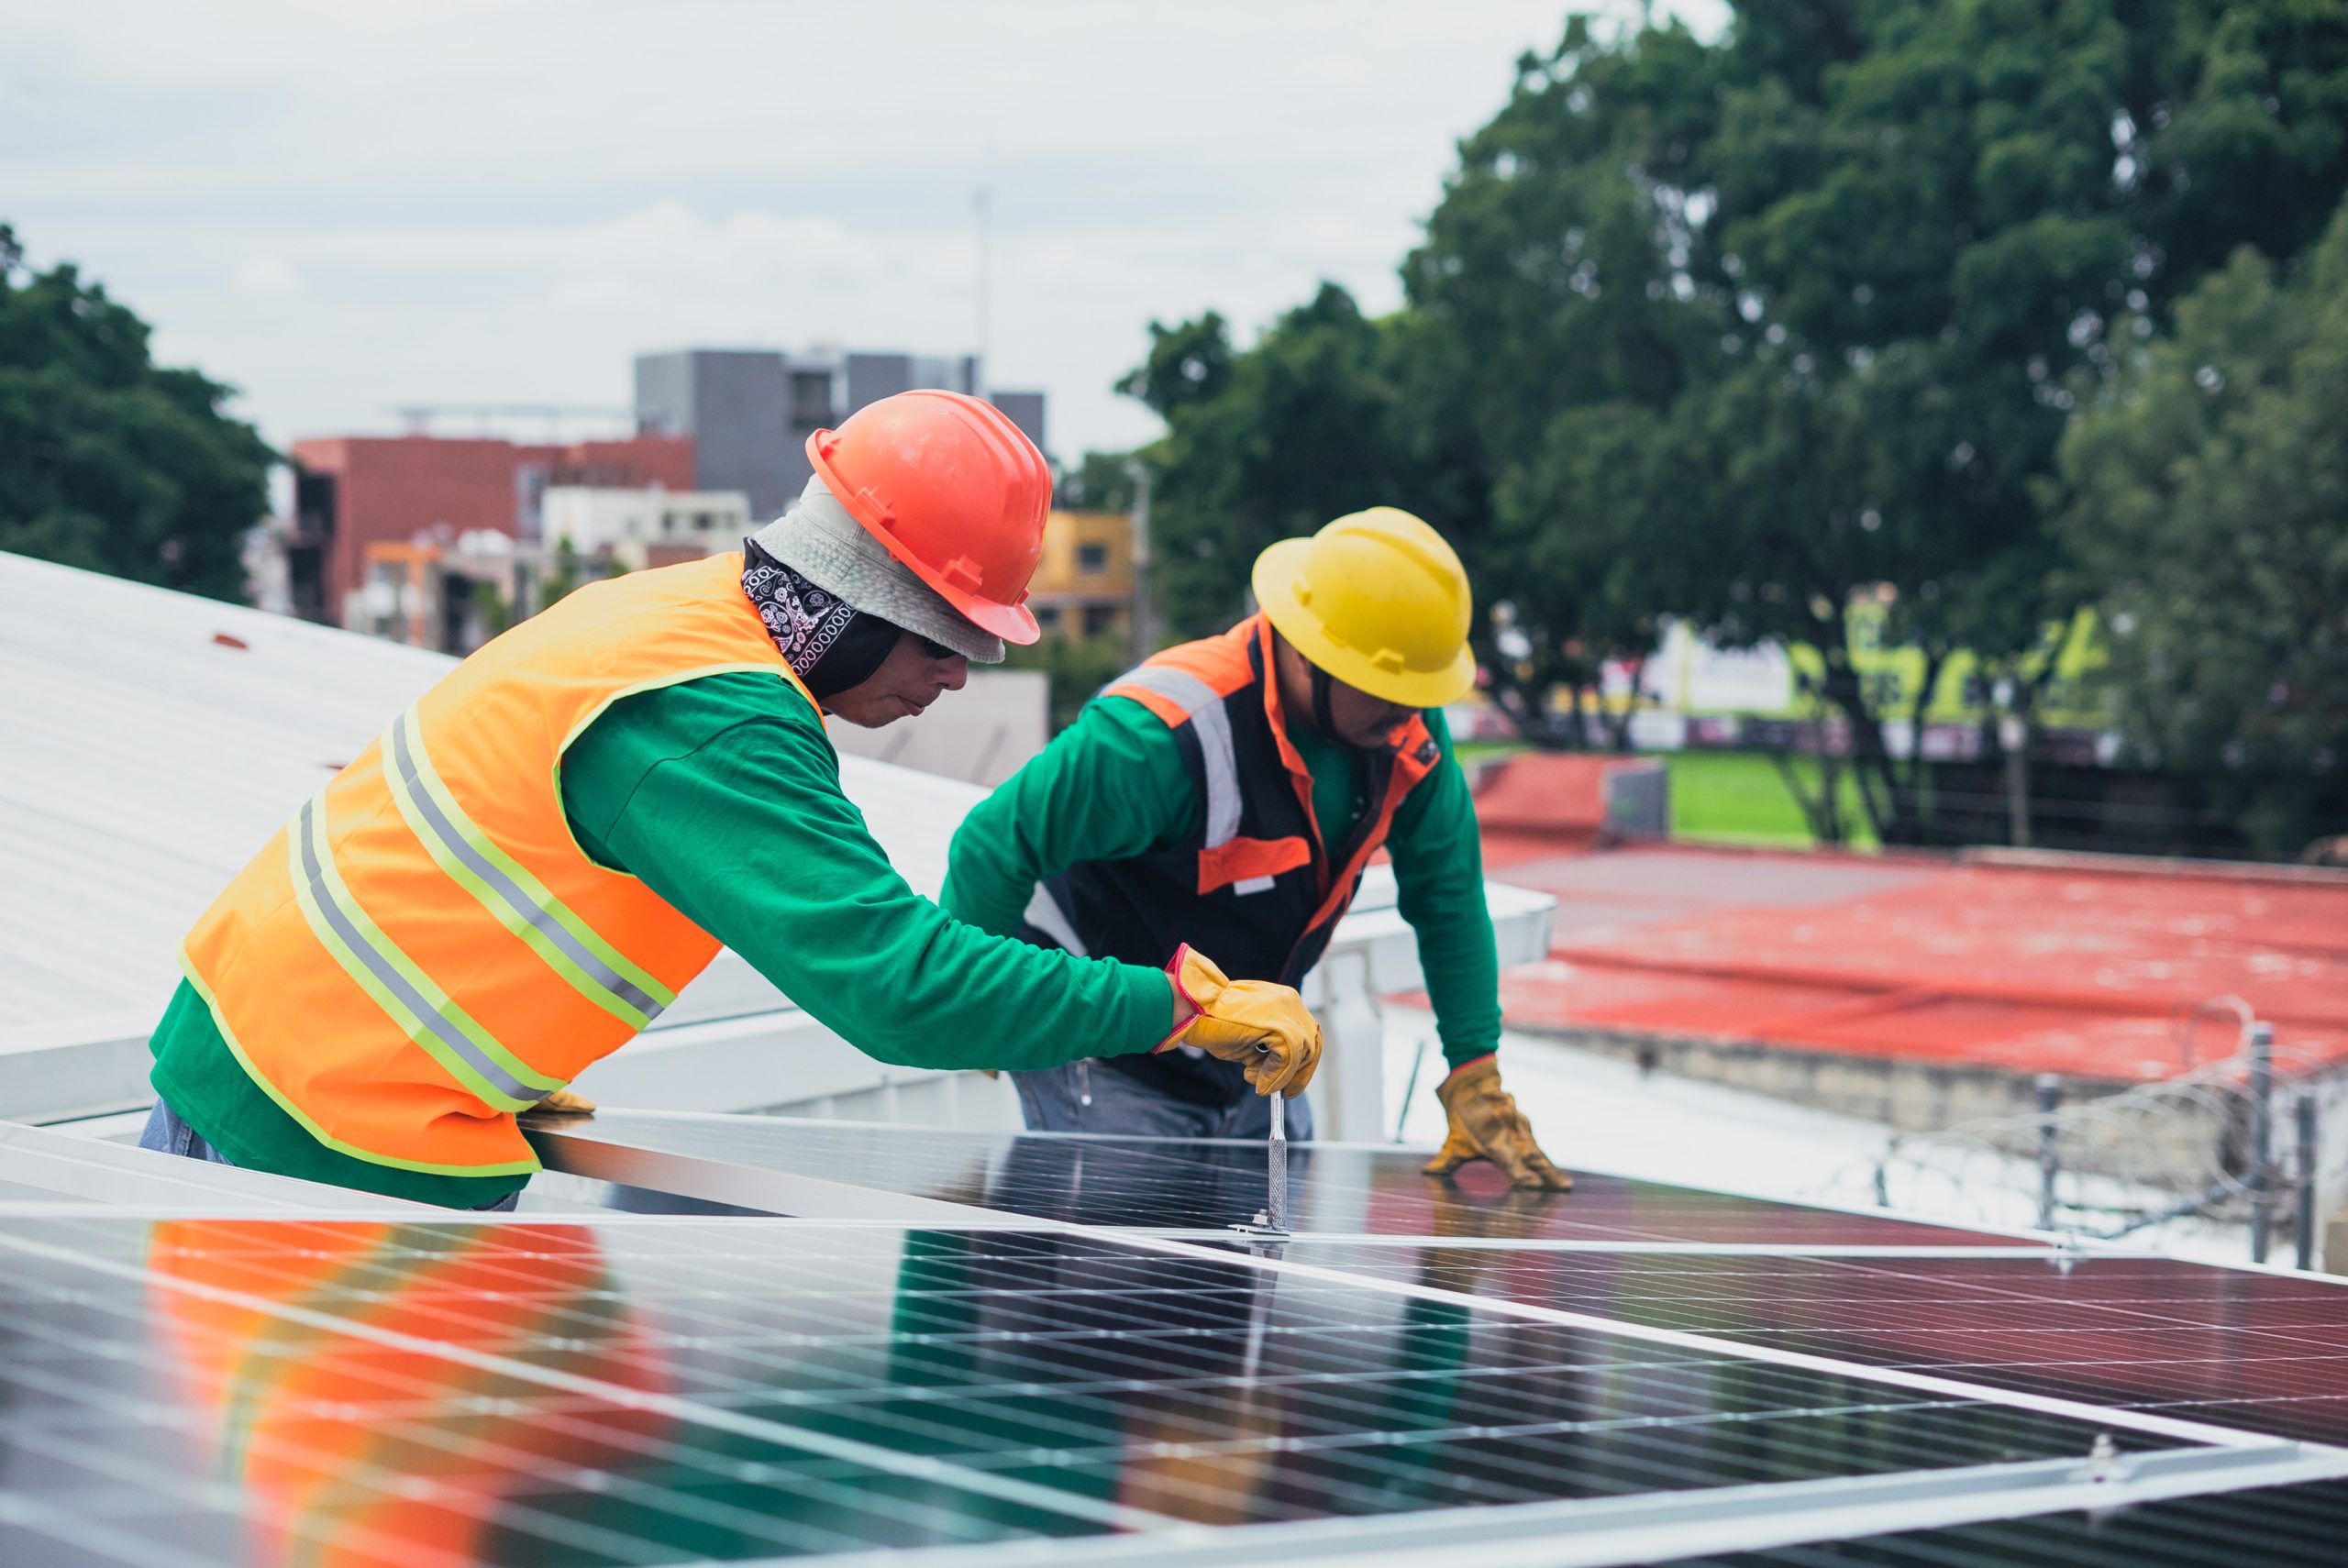 Two construction workers in hard hats lean over a solar panel. One workers is holding a tool.